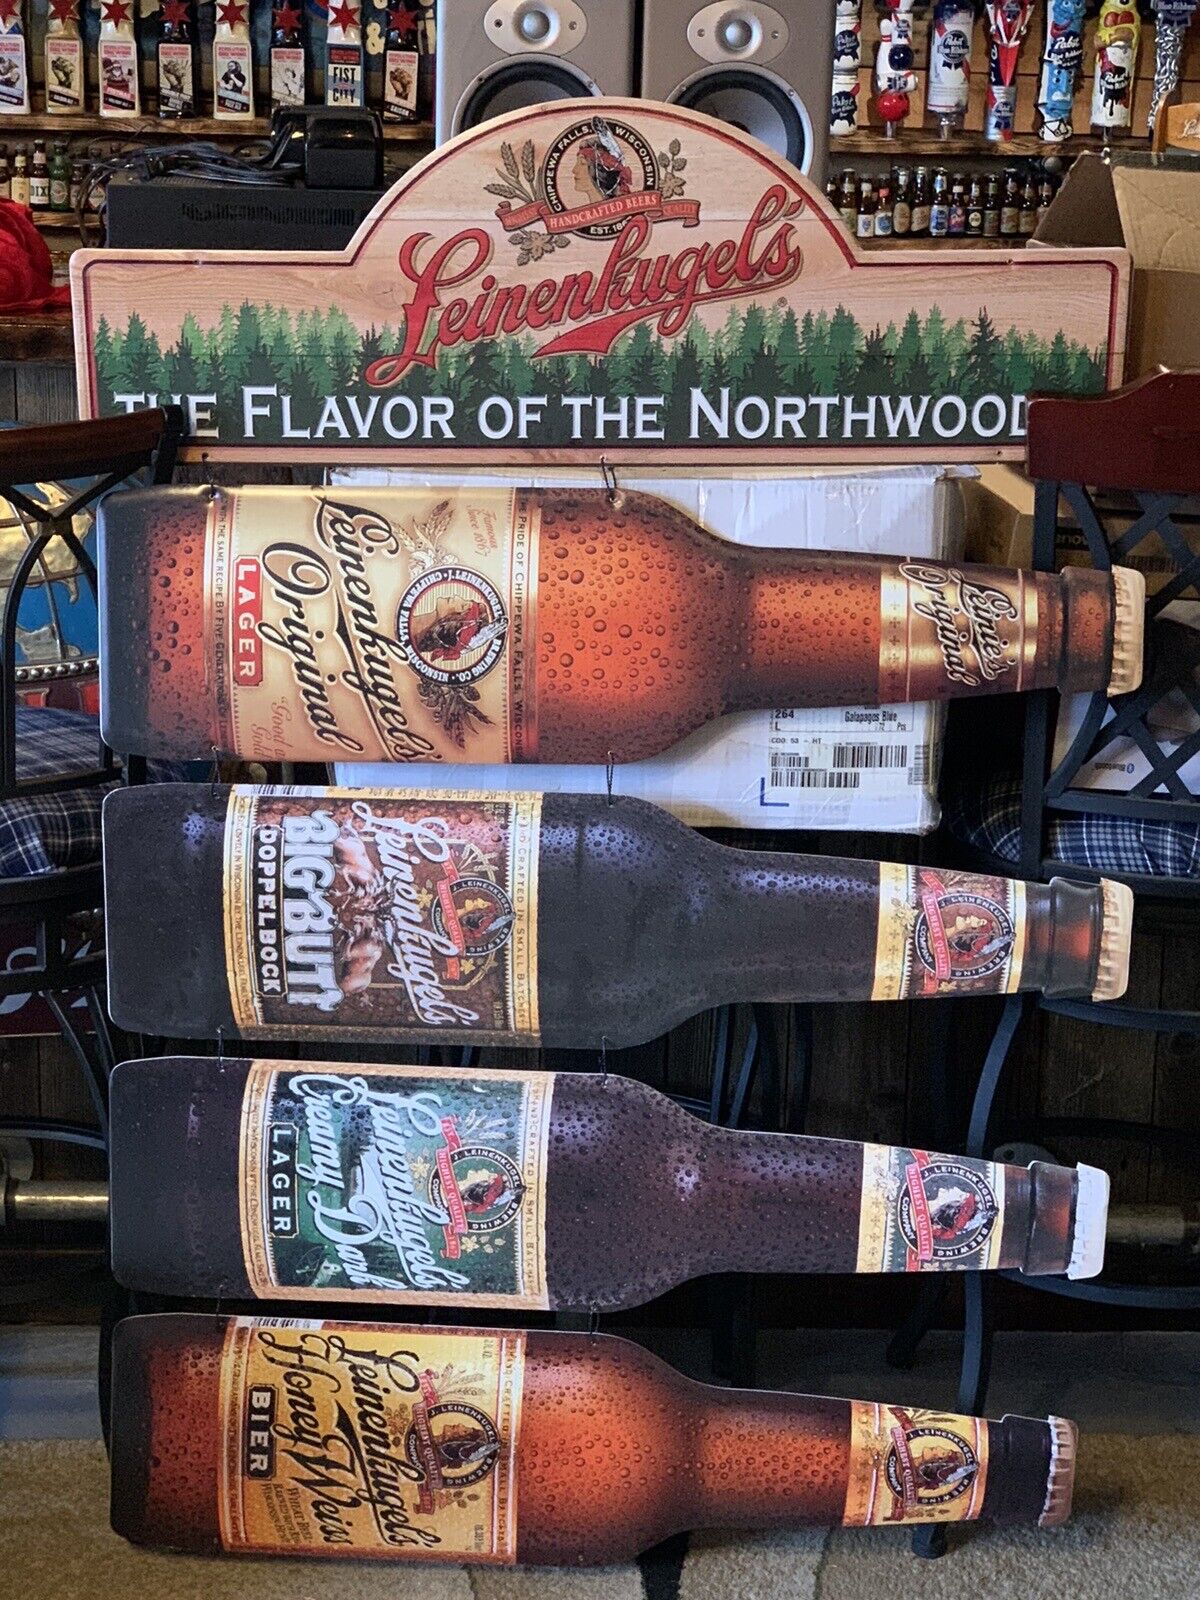 Rare Two-Sided Leinenkugel’s Flavor of the Northwoods Hanging Beer Sign